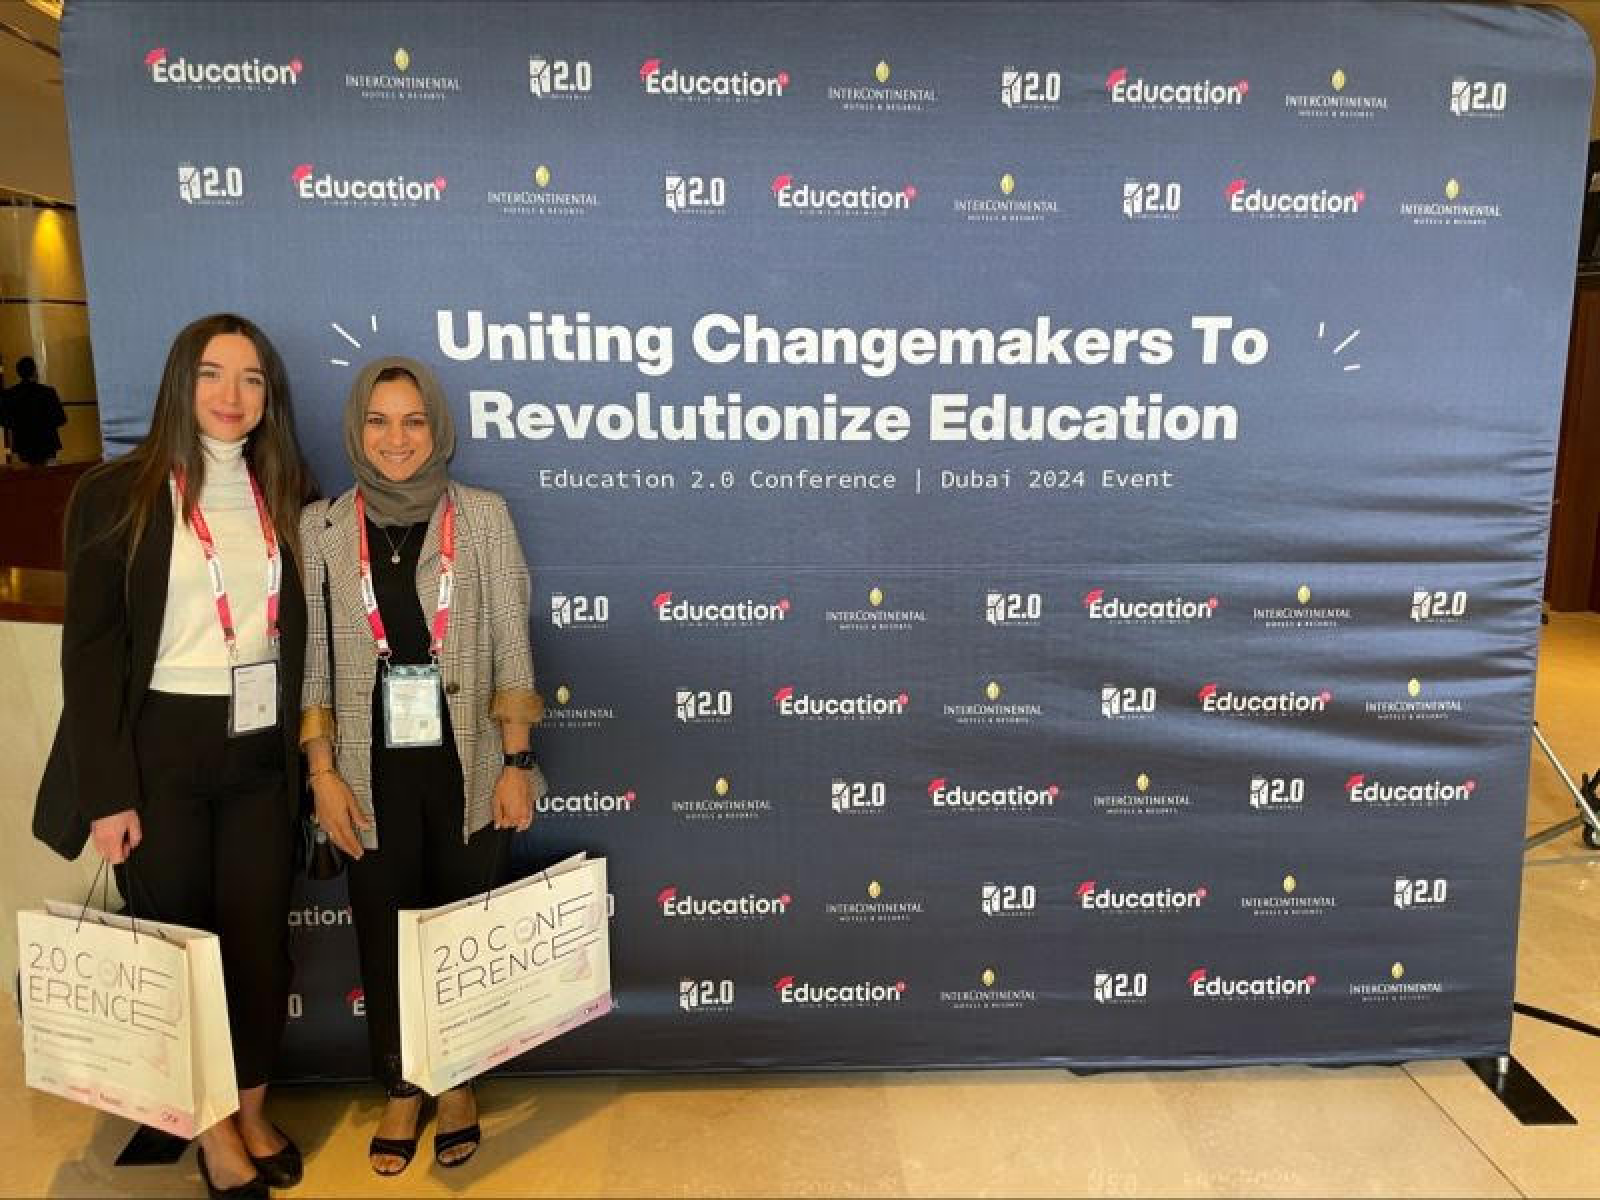 Baobabooks to Participate in Education 2.0 Conference in Dubai